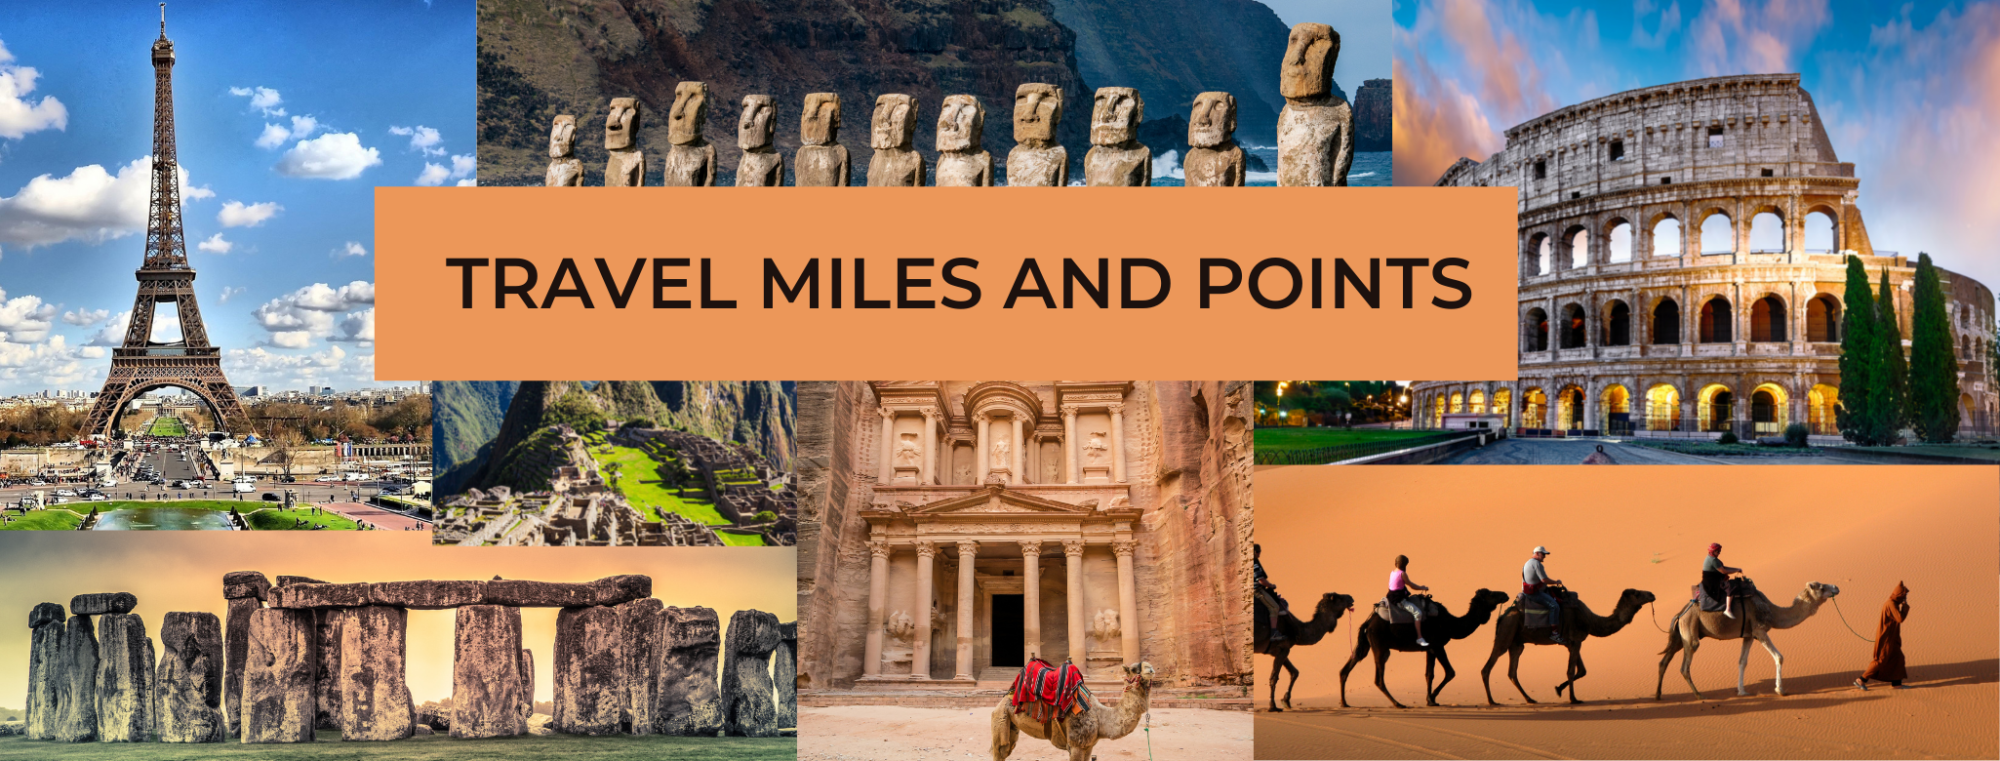 TRAVEL-MILES-AND-POINTS